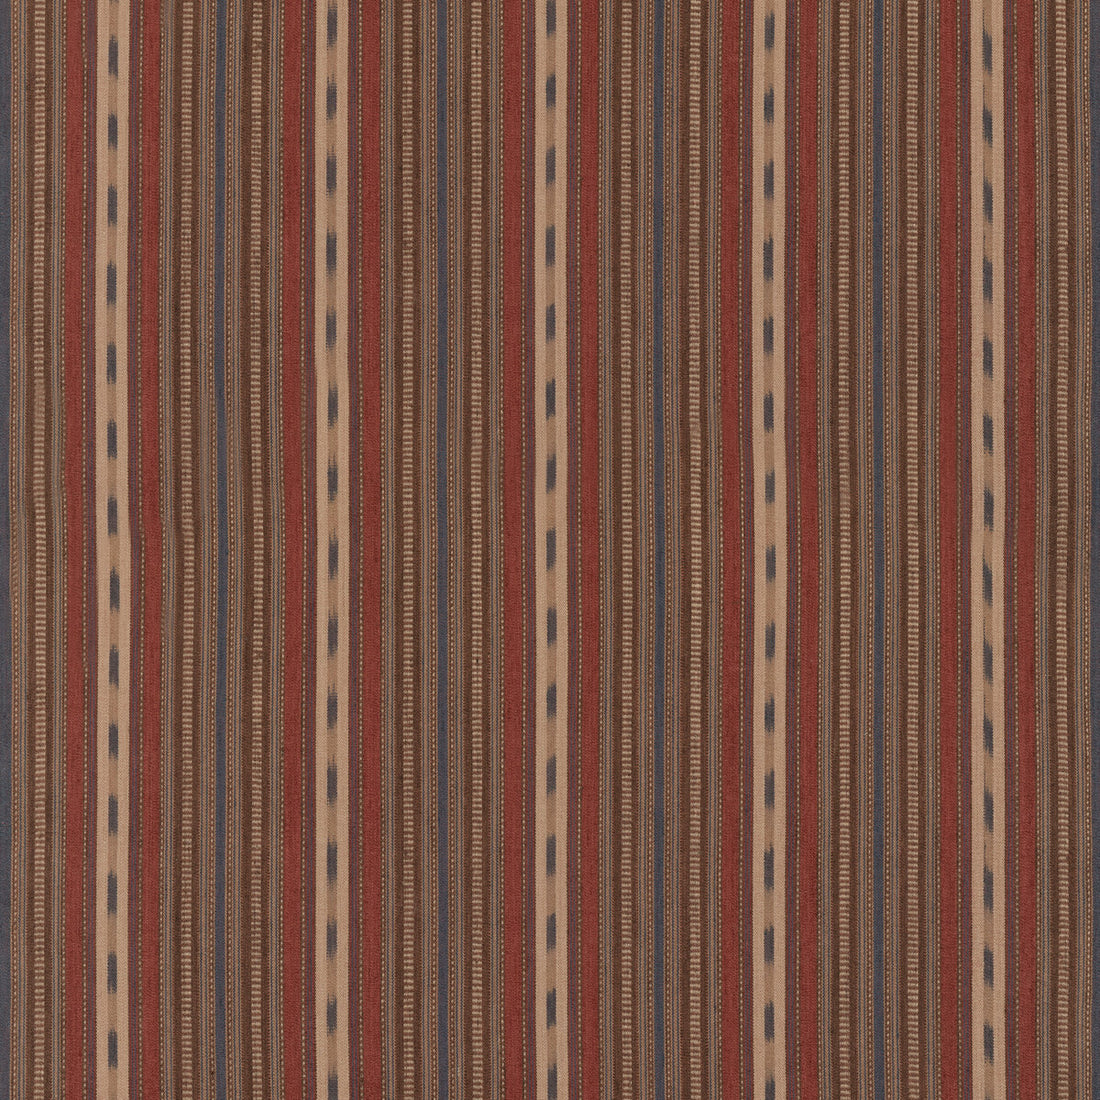 Stony Stripe fabric in rust/blue color - pattern FD825.P104.0 - by Mulberry in the Westerly Stripes collection